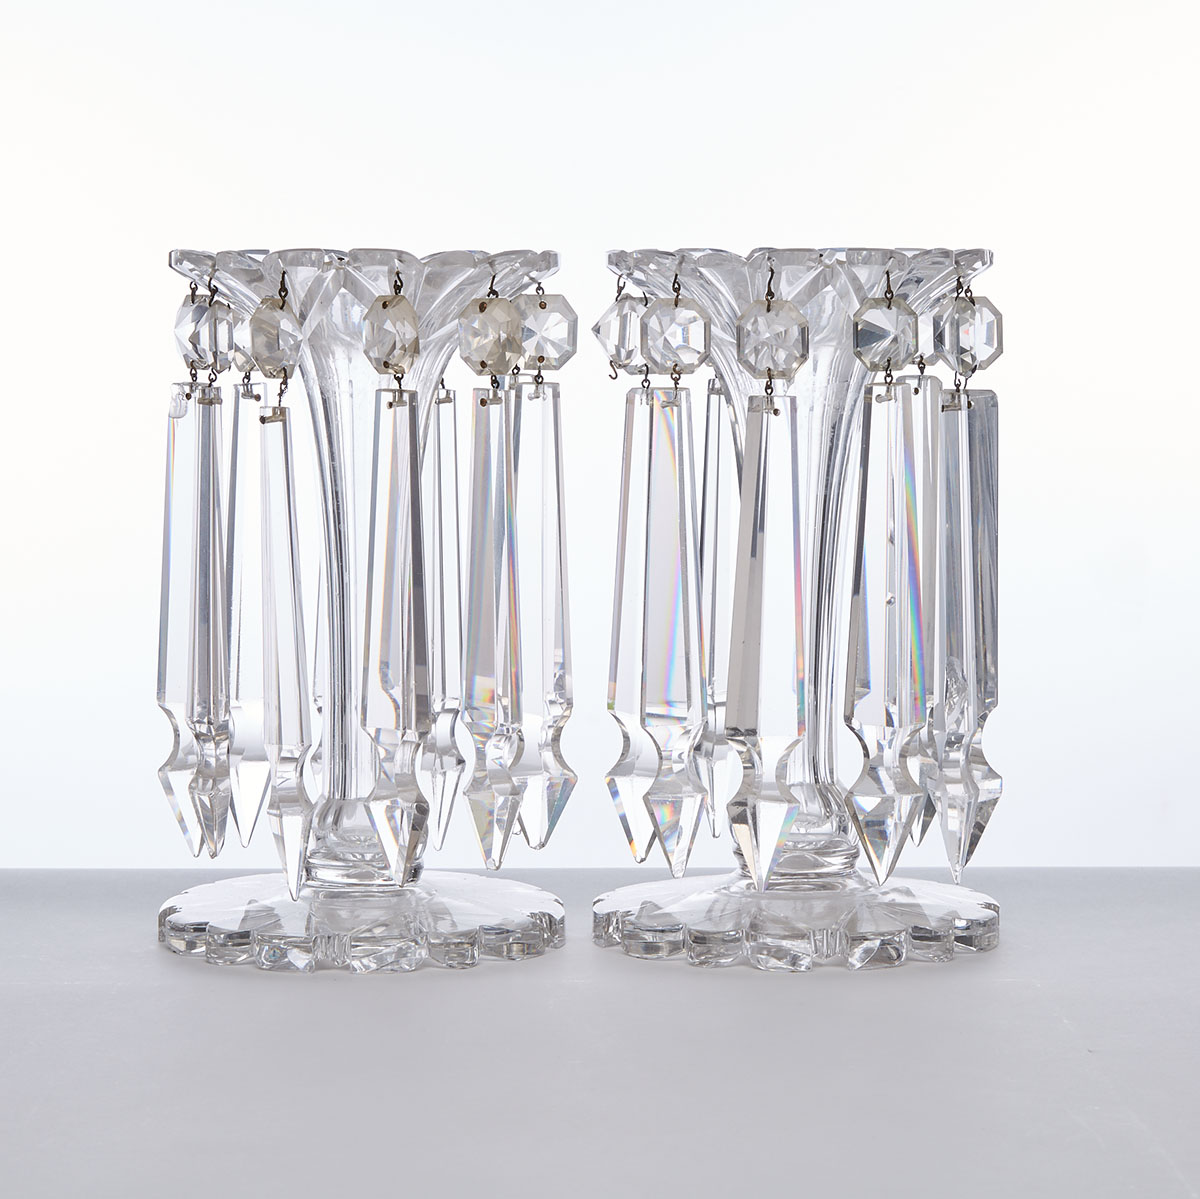 Pair of Cut Glass Vase Lustres, late 19th century